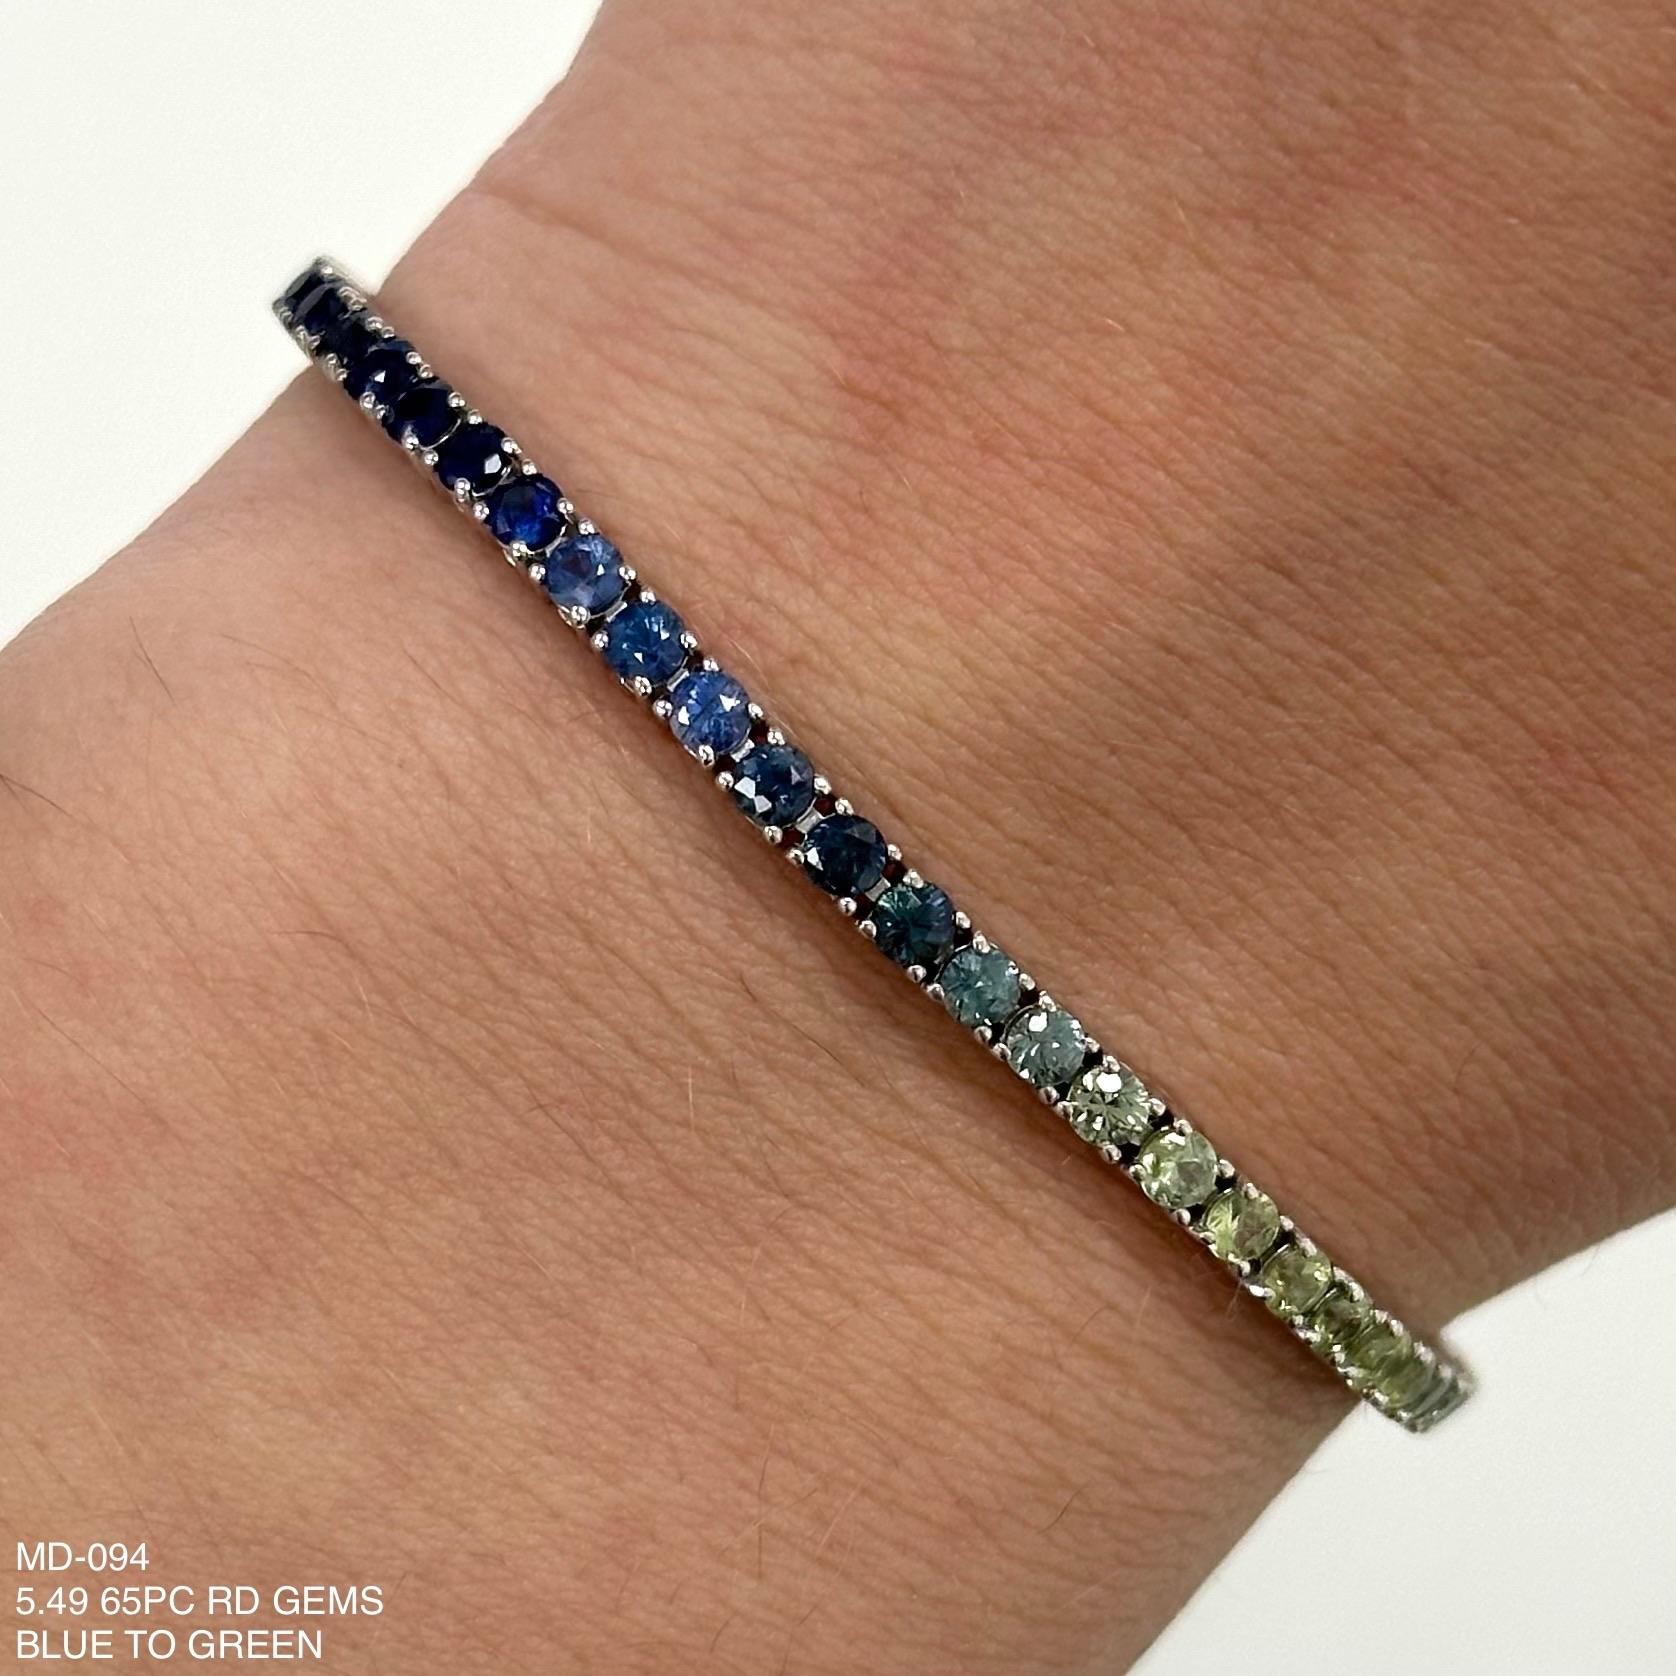 Exquisite and perfectly blended blue to green sapphire tennis bracelet, by Alexander Beverly Hills.
65 round sapphires, 5.49 carats total. Four prong set in 18-karat white gold, 8.46 grams, 7 inches.
Accommodated with an up-to-date digital appraisal